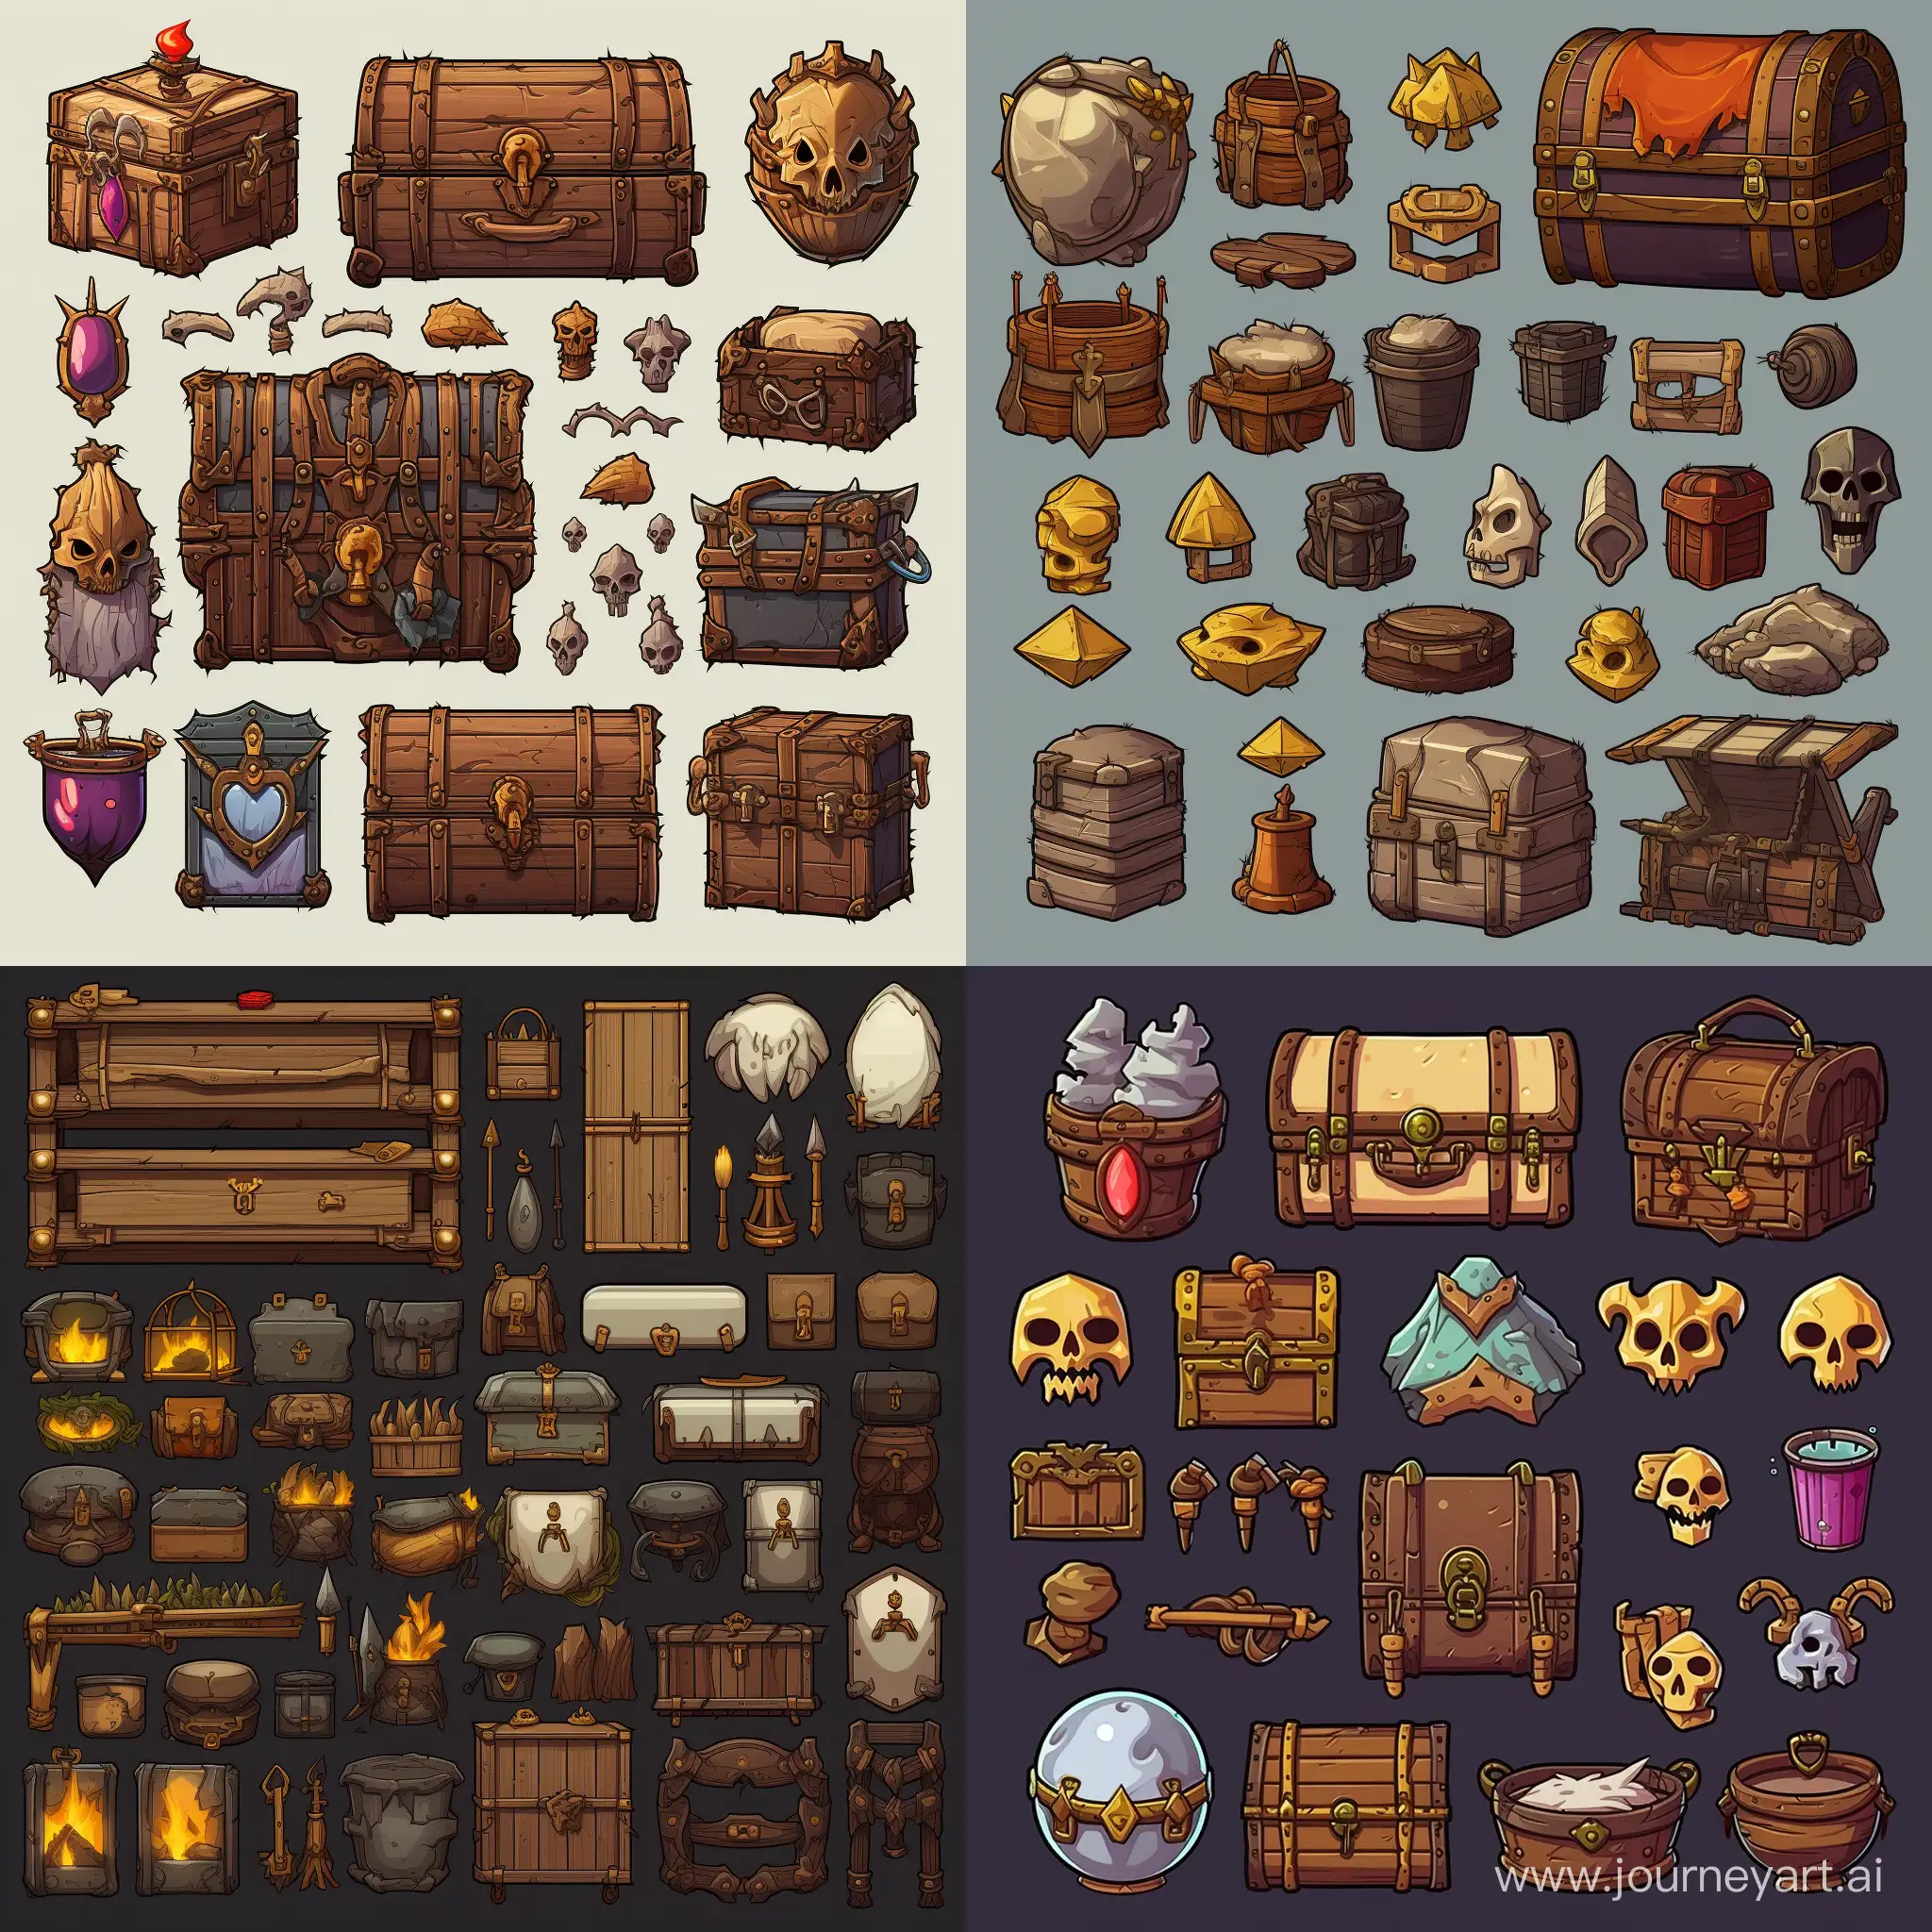 RPG-Items-Spritesheet-with-Treasure-Chest-Fantasy-Game-Assets